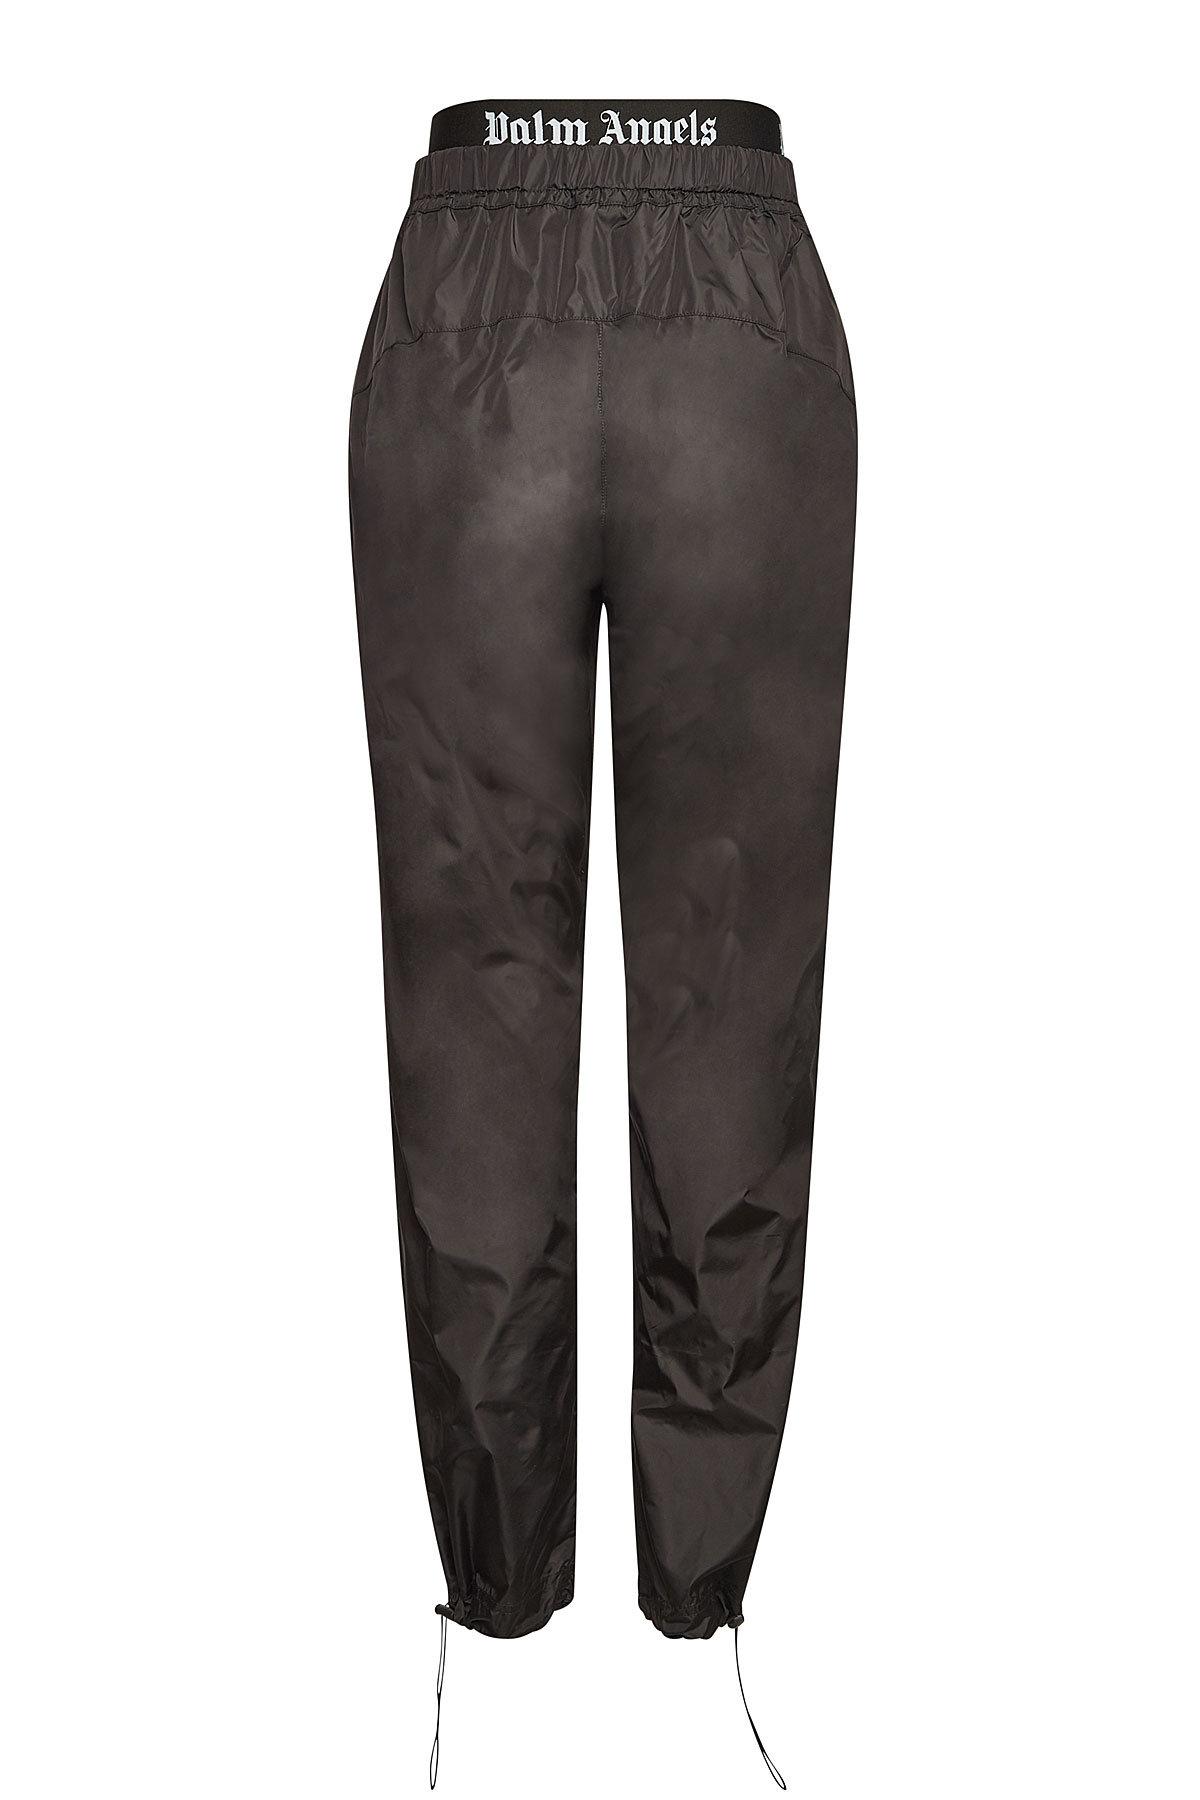 Palm Angels Track Pants in Black - Lyst